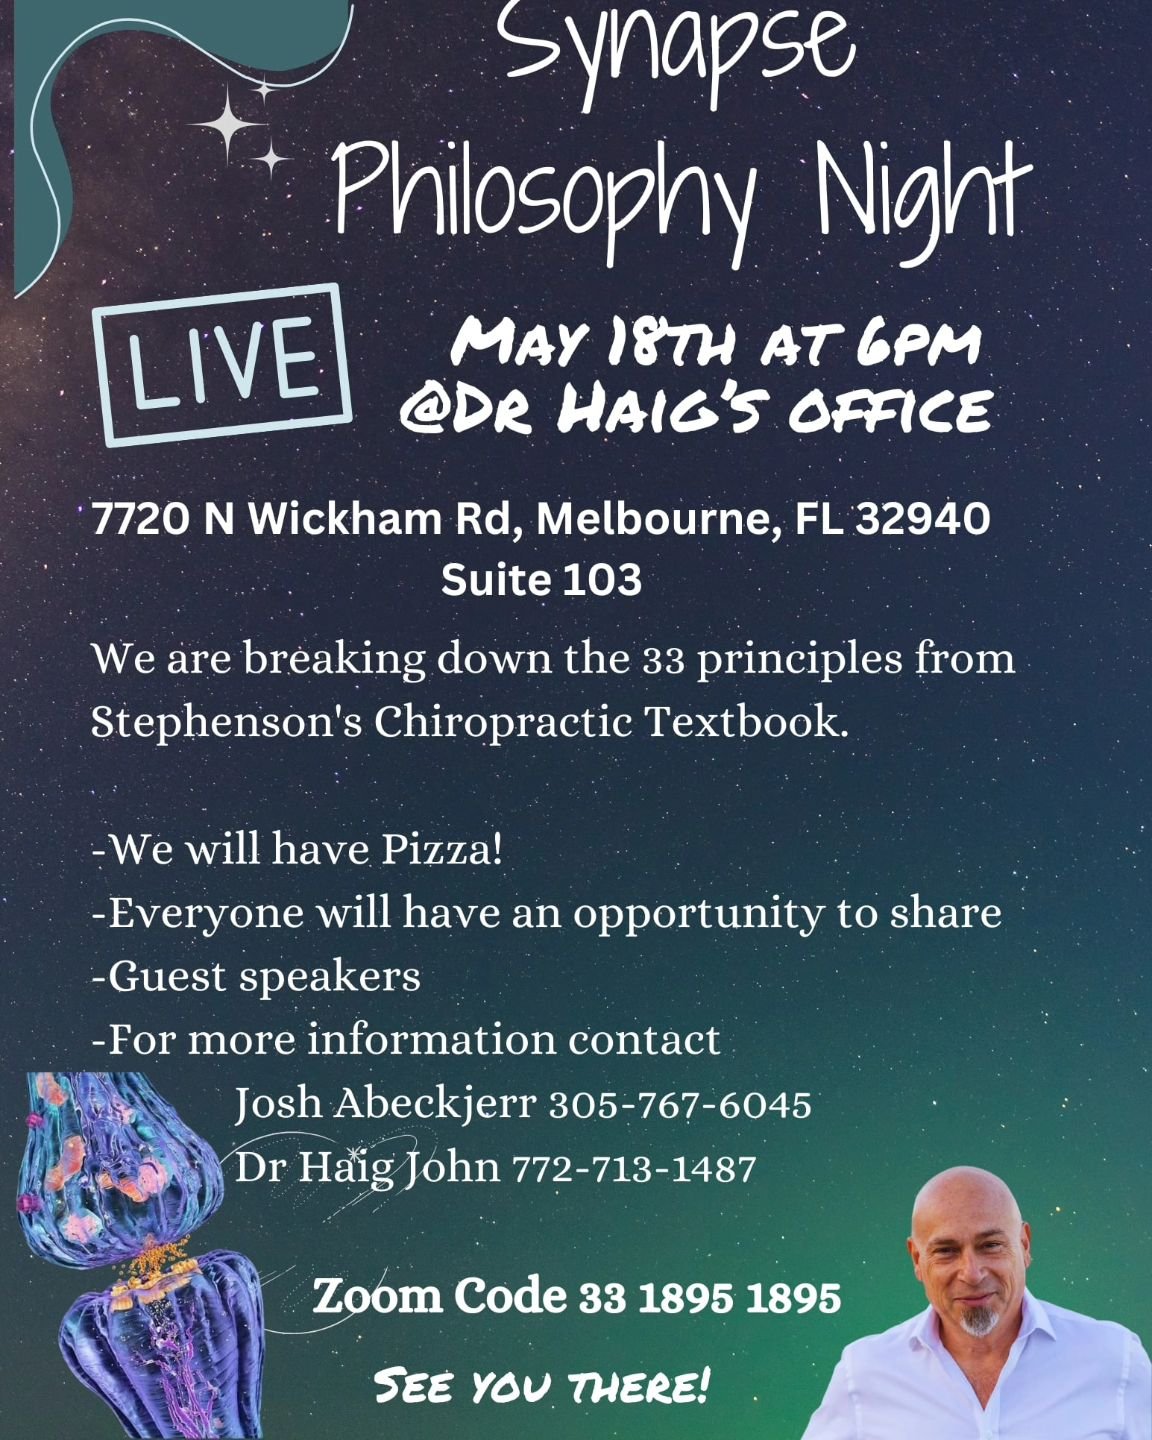 Philosophy night coming May18th.